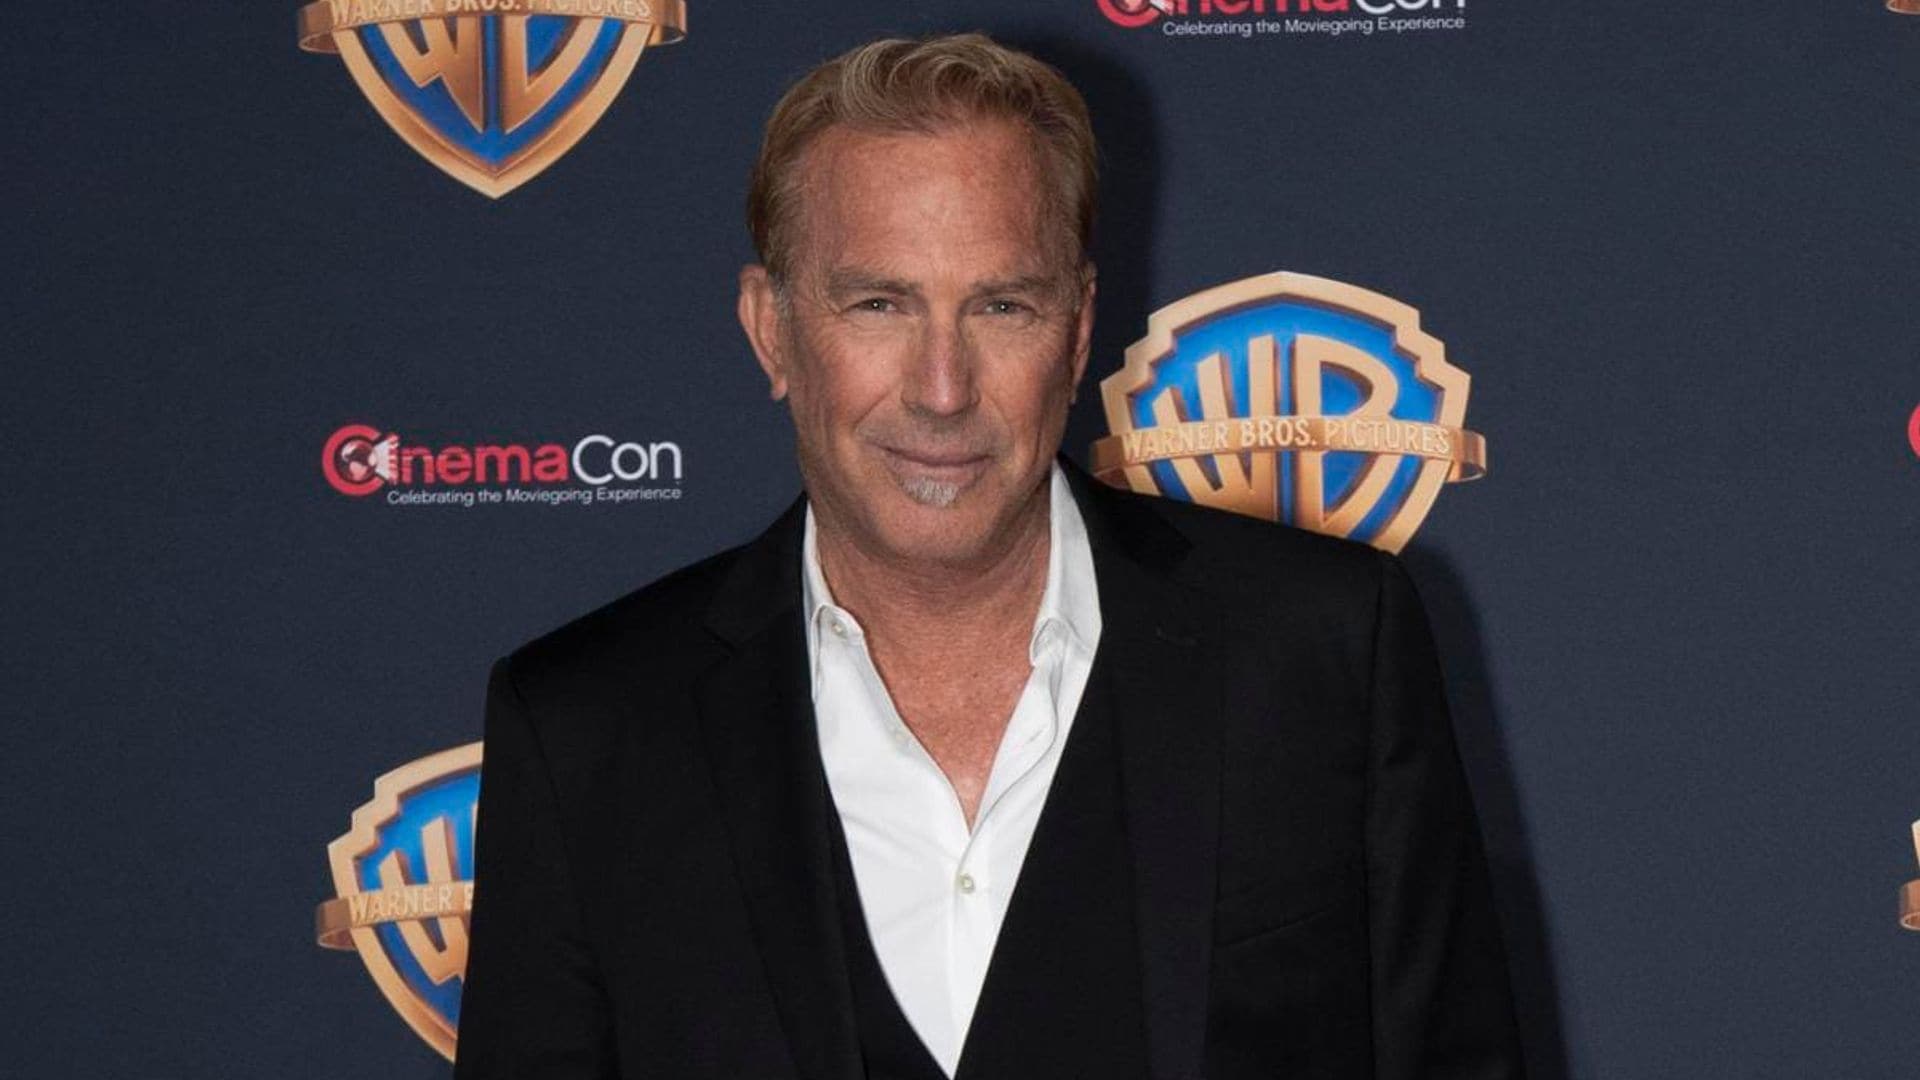 Kevin Costner named his son after a character in ‘Horizon’, his new film